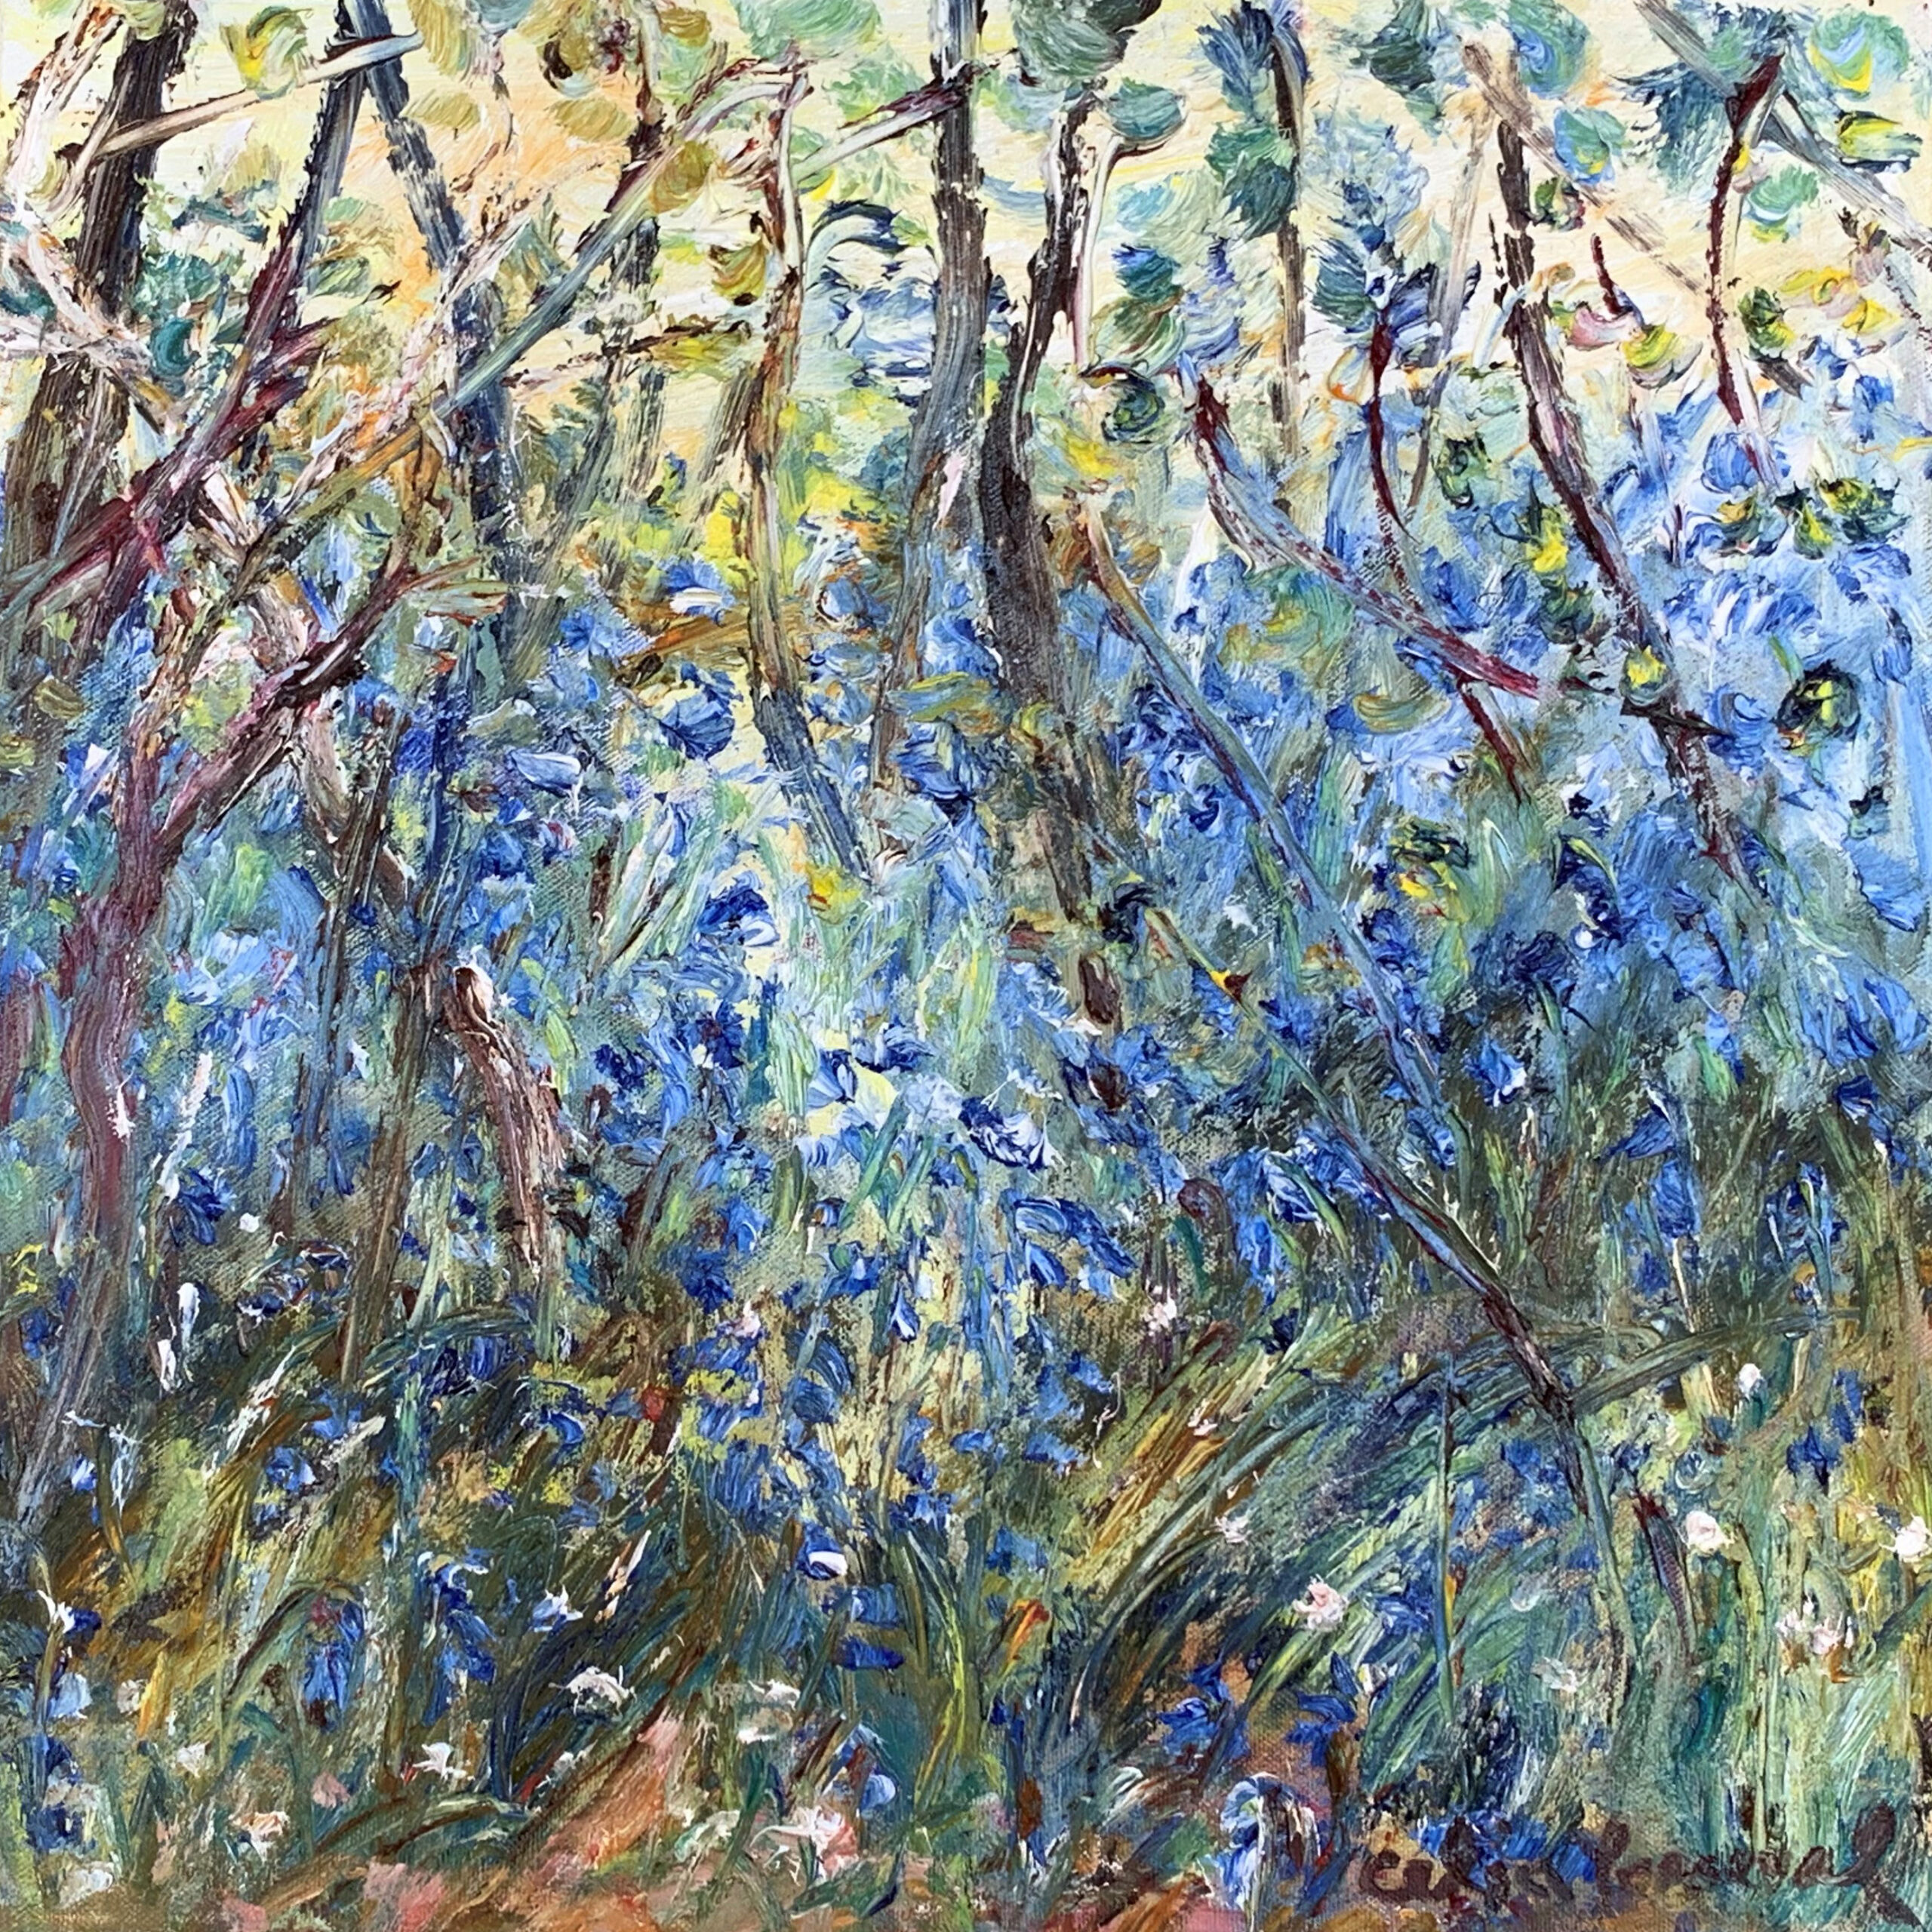 Perceval_Bluebells in Rodd Wood_oil on canvas_40 x40_master